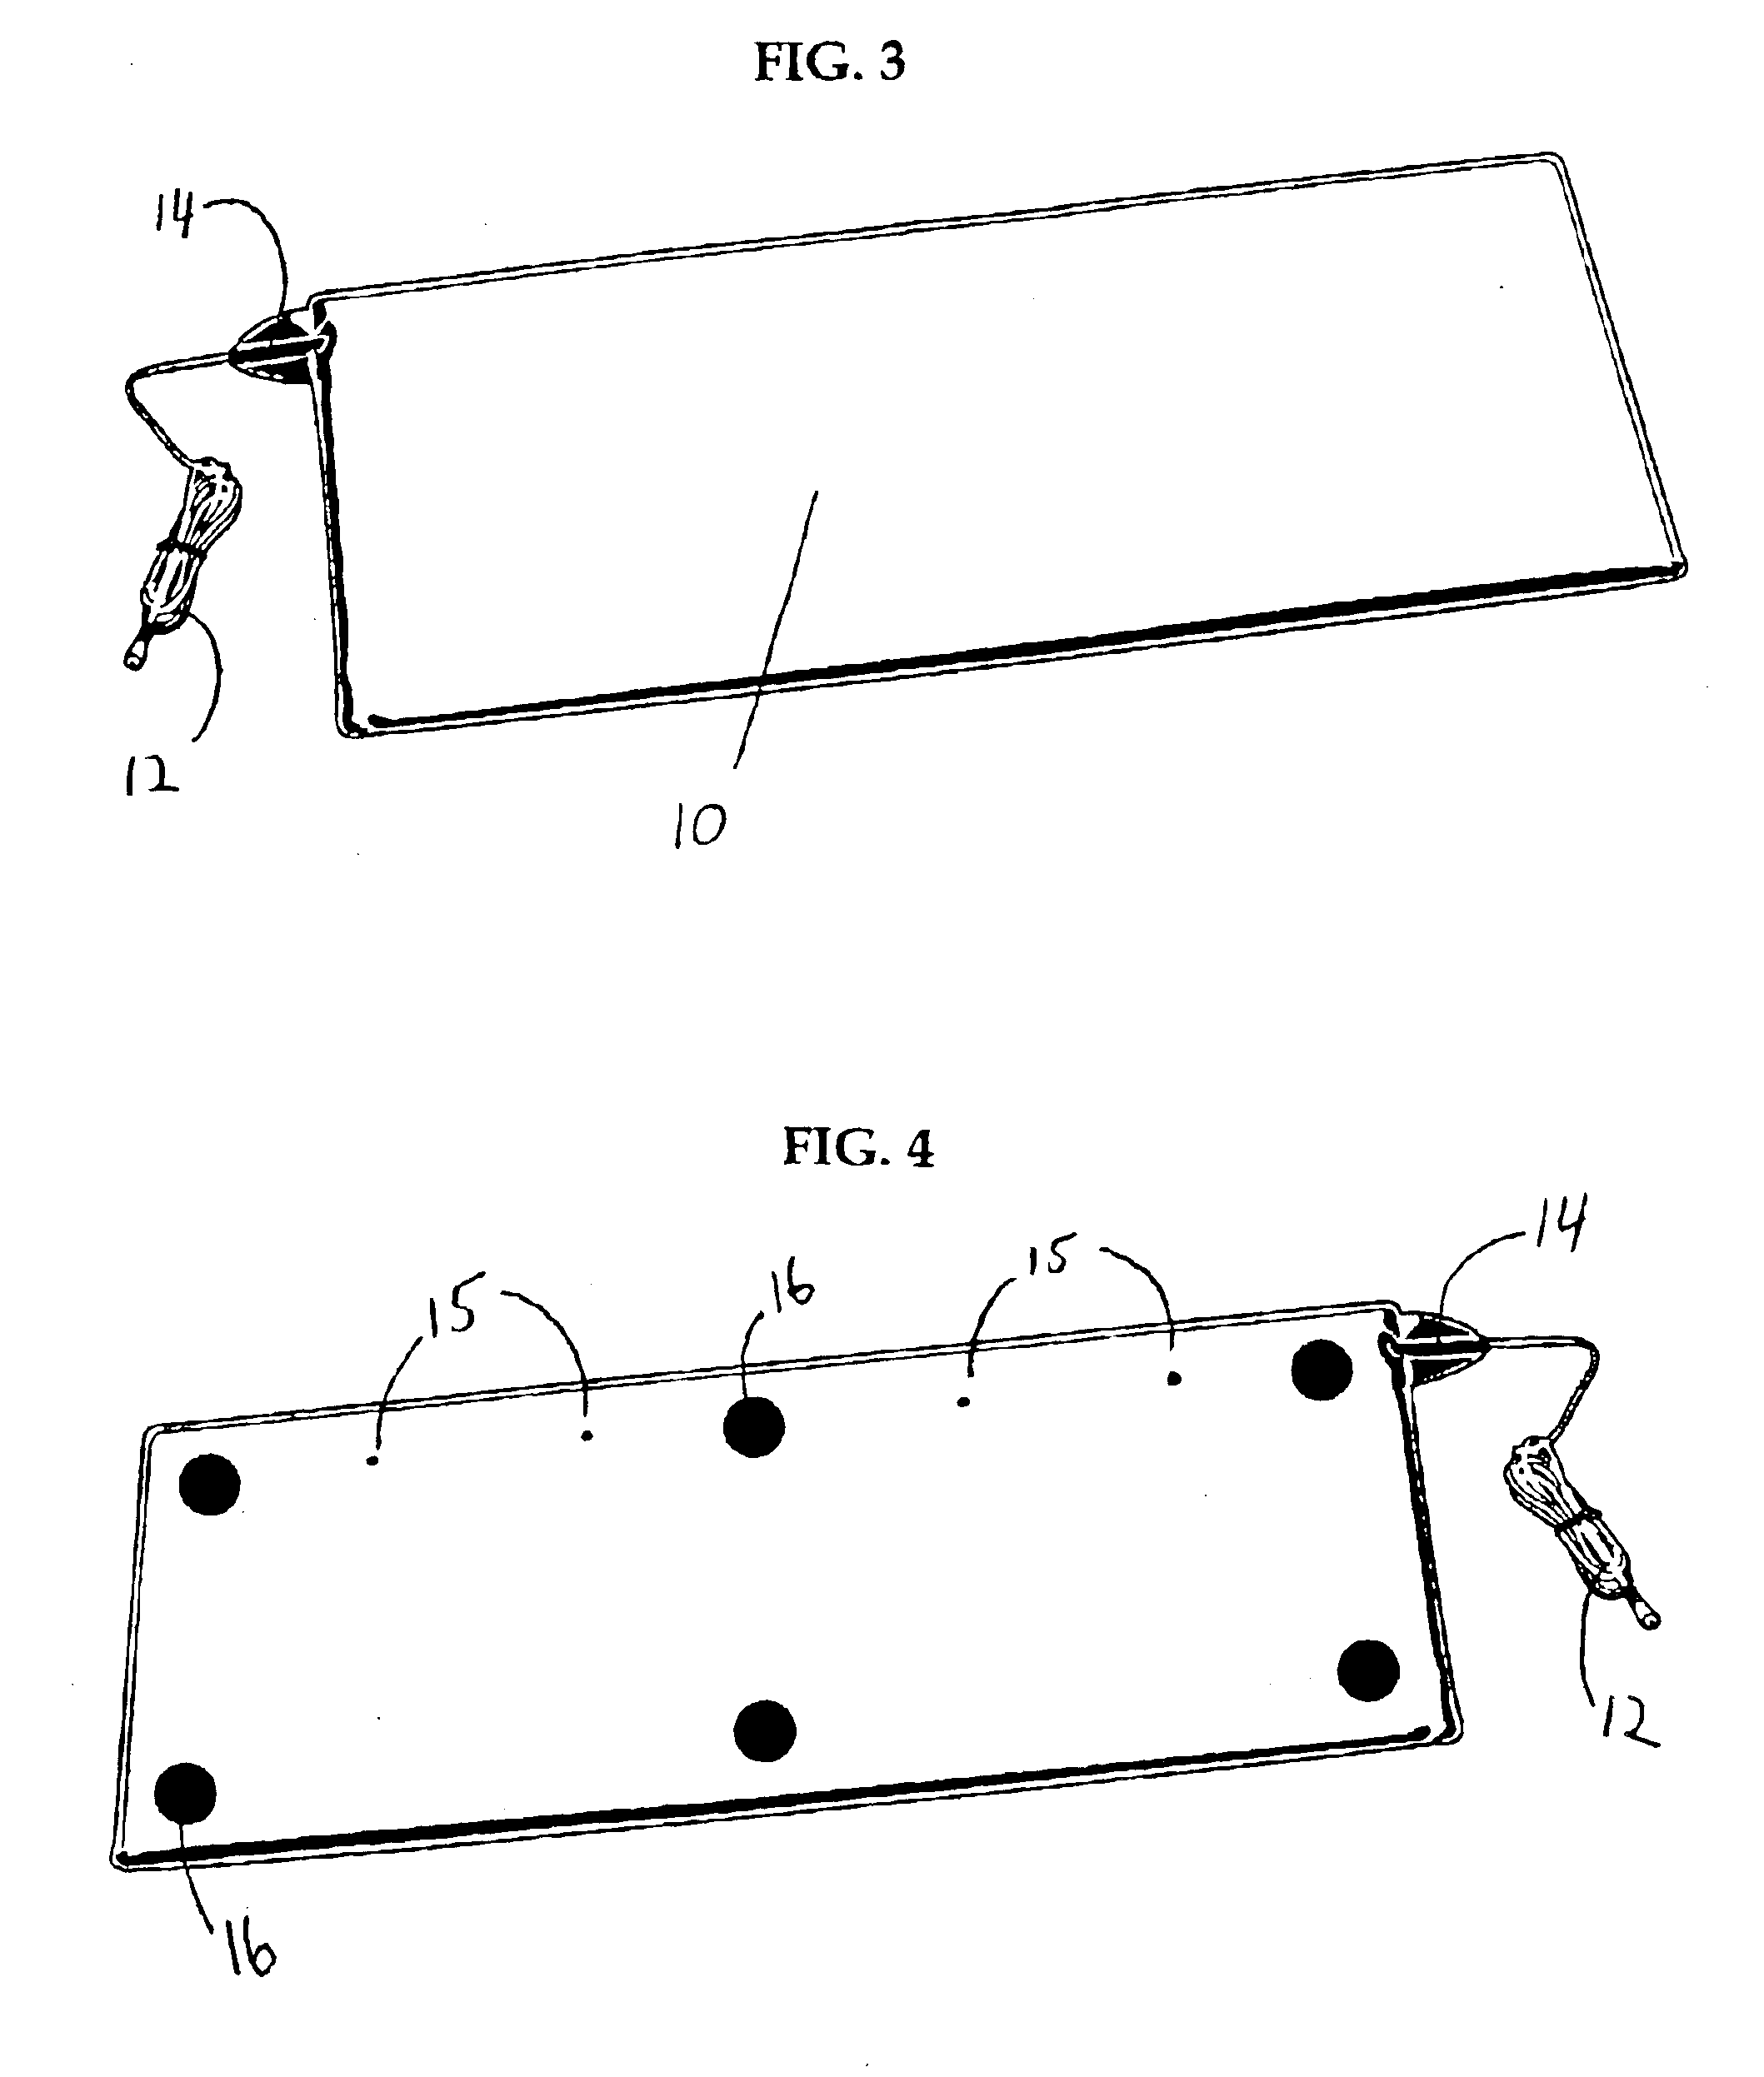 Patient position monitoring device